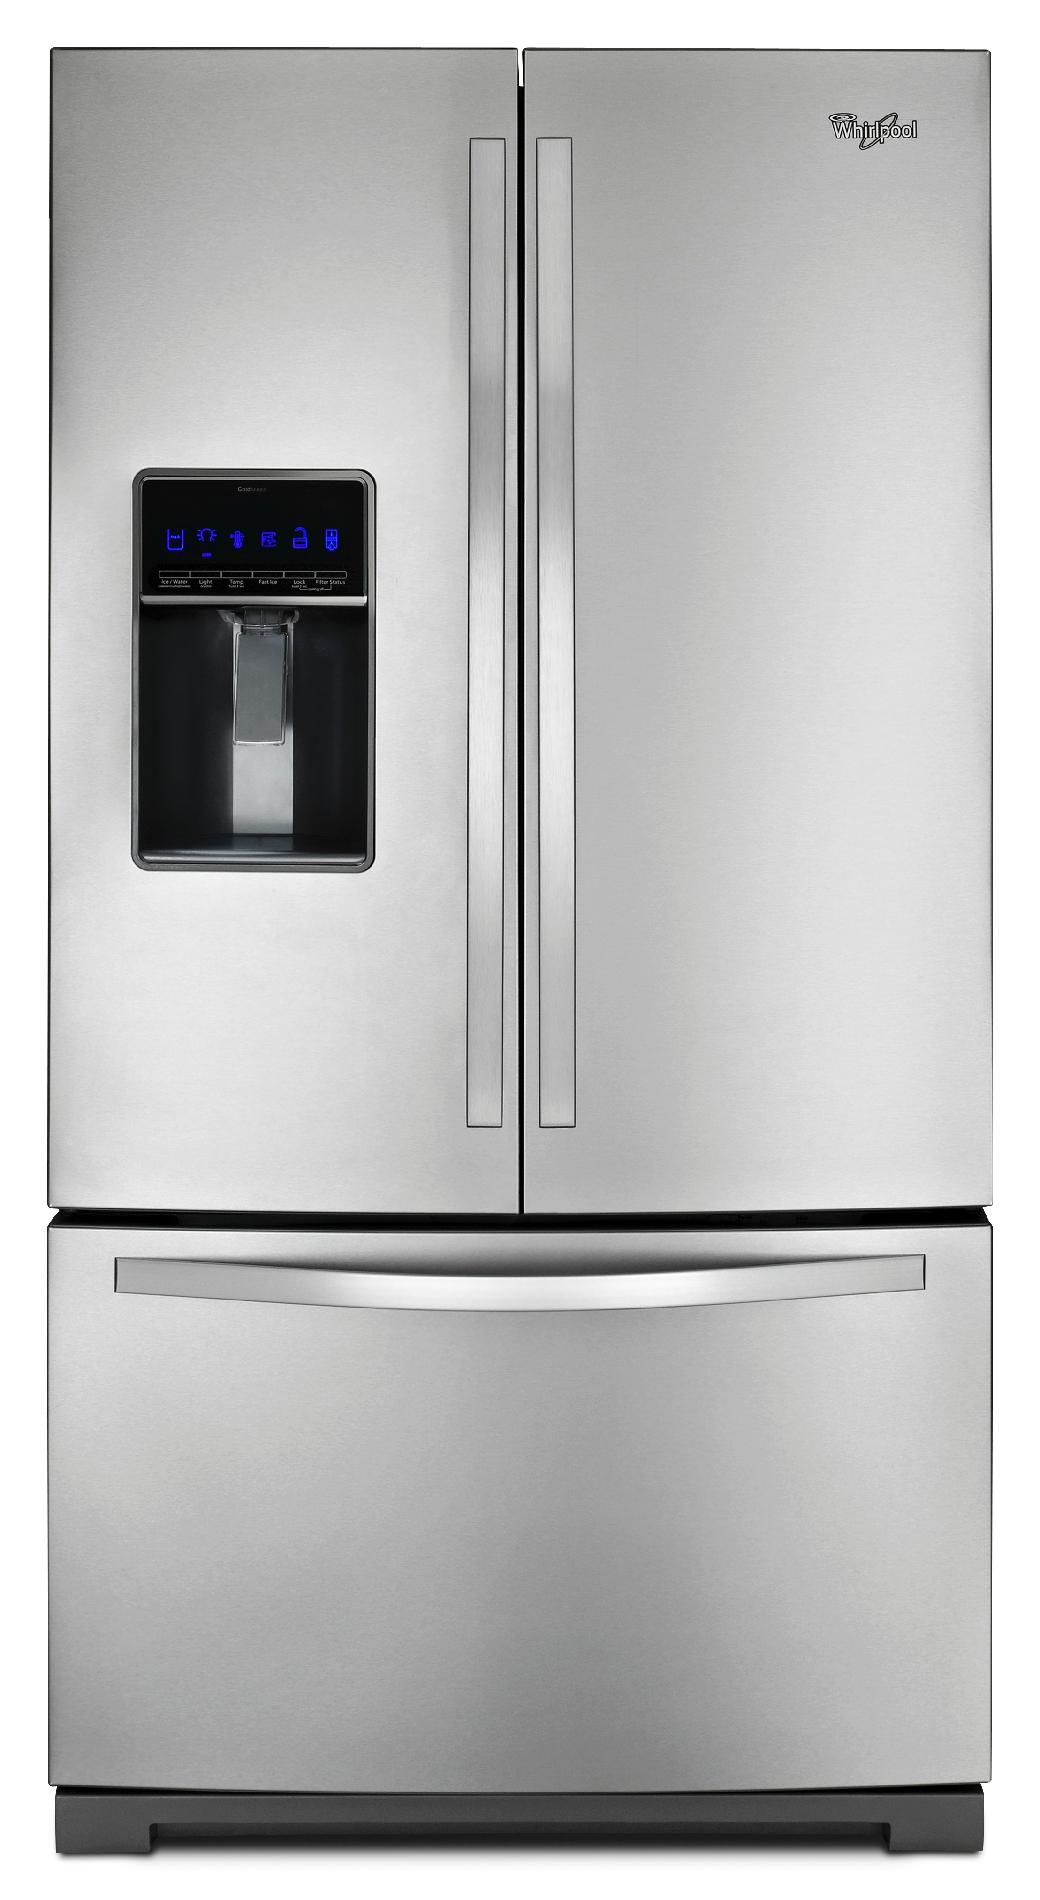 Whirlpool 26 cu. ft. French Door Refrigerator w/ MicroEdge Shelves - Stainless Steel